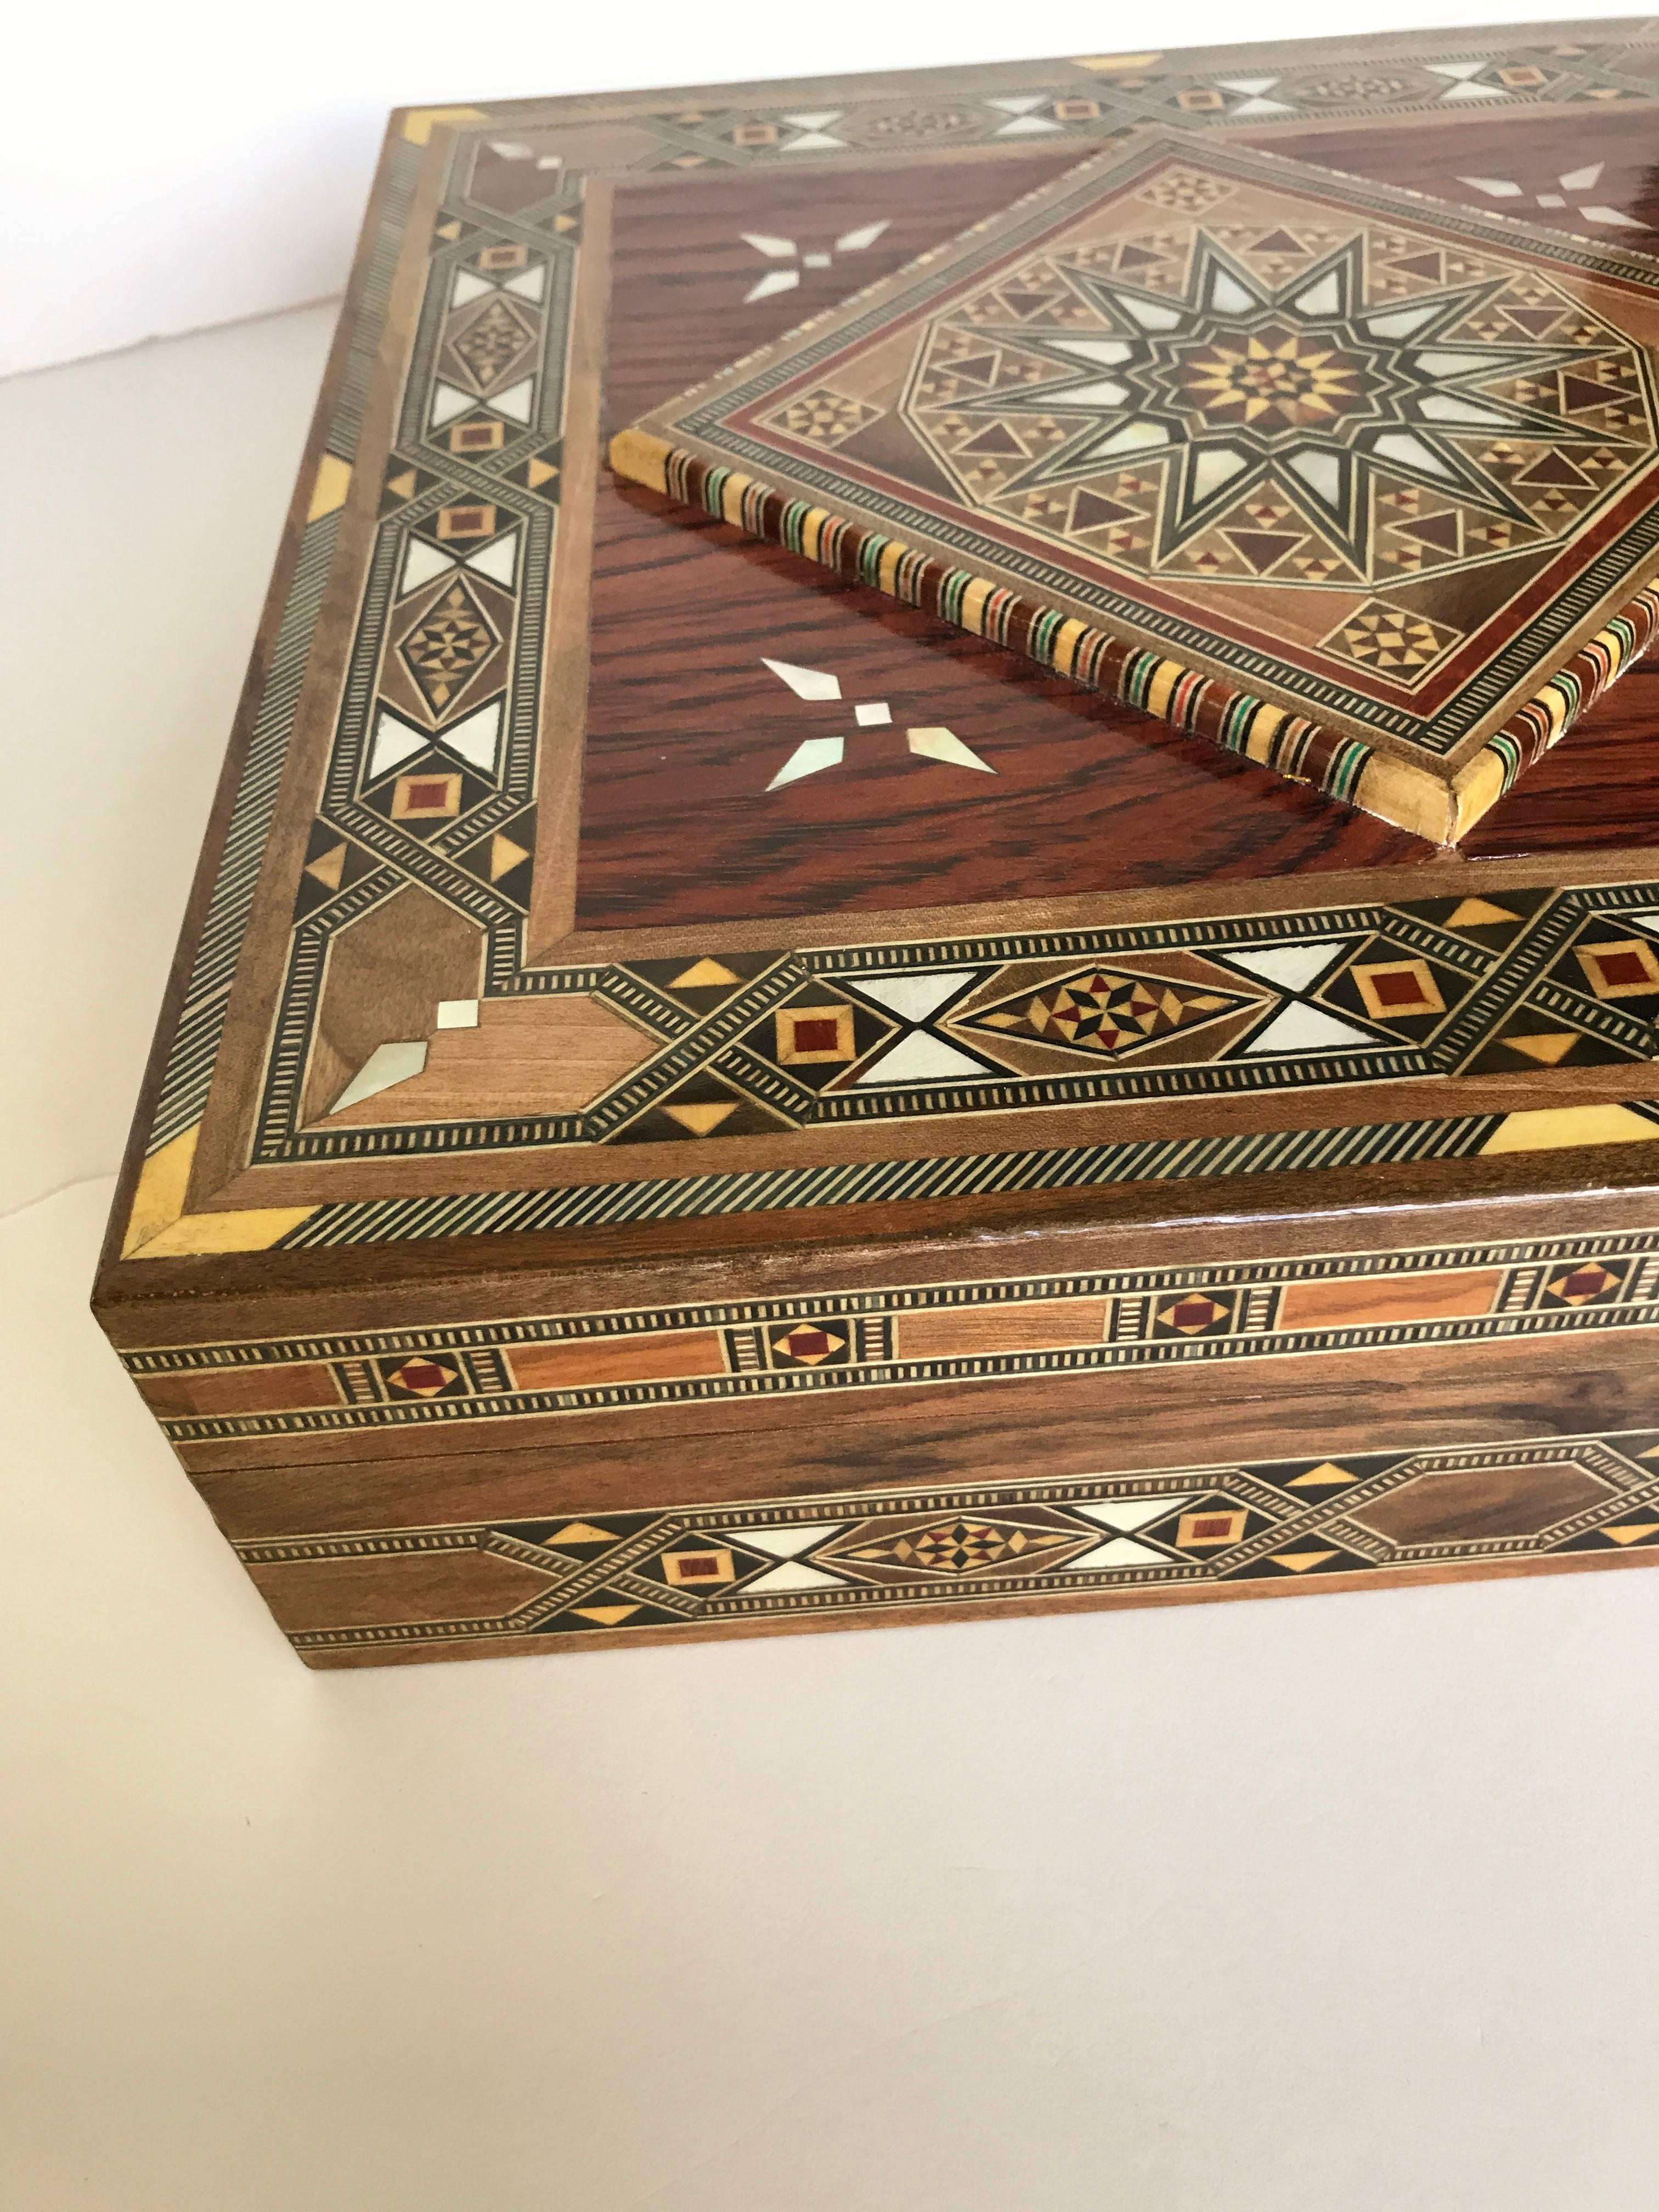 Syrian Walnut Wood Box Inlaid with Mother-of-Pearl, Cream Leather Lining 2